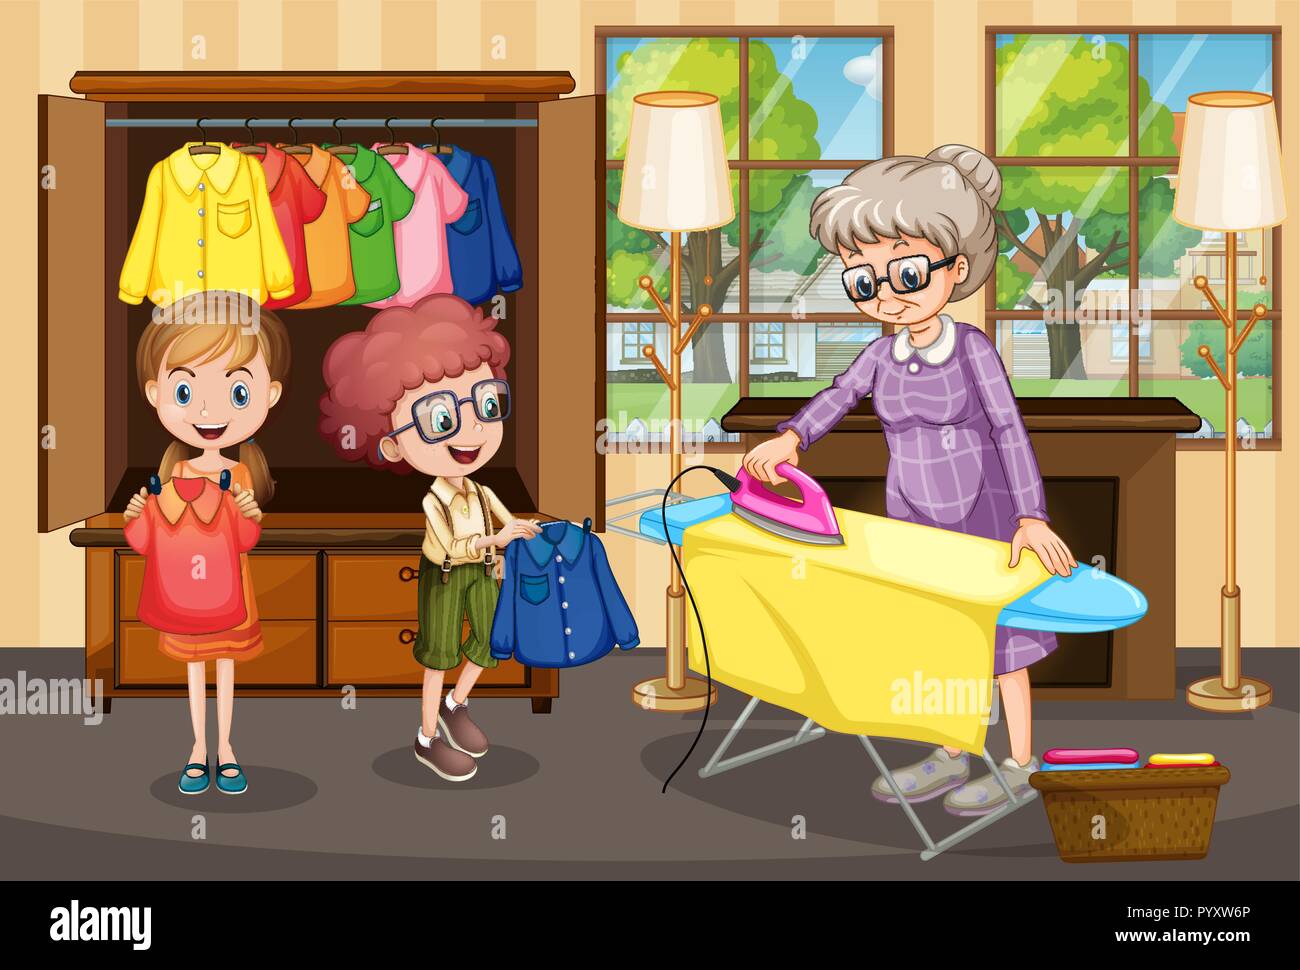 Grandmother ironing clothes for children illustration Stock Vector